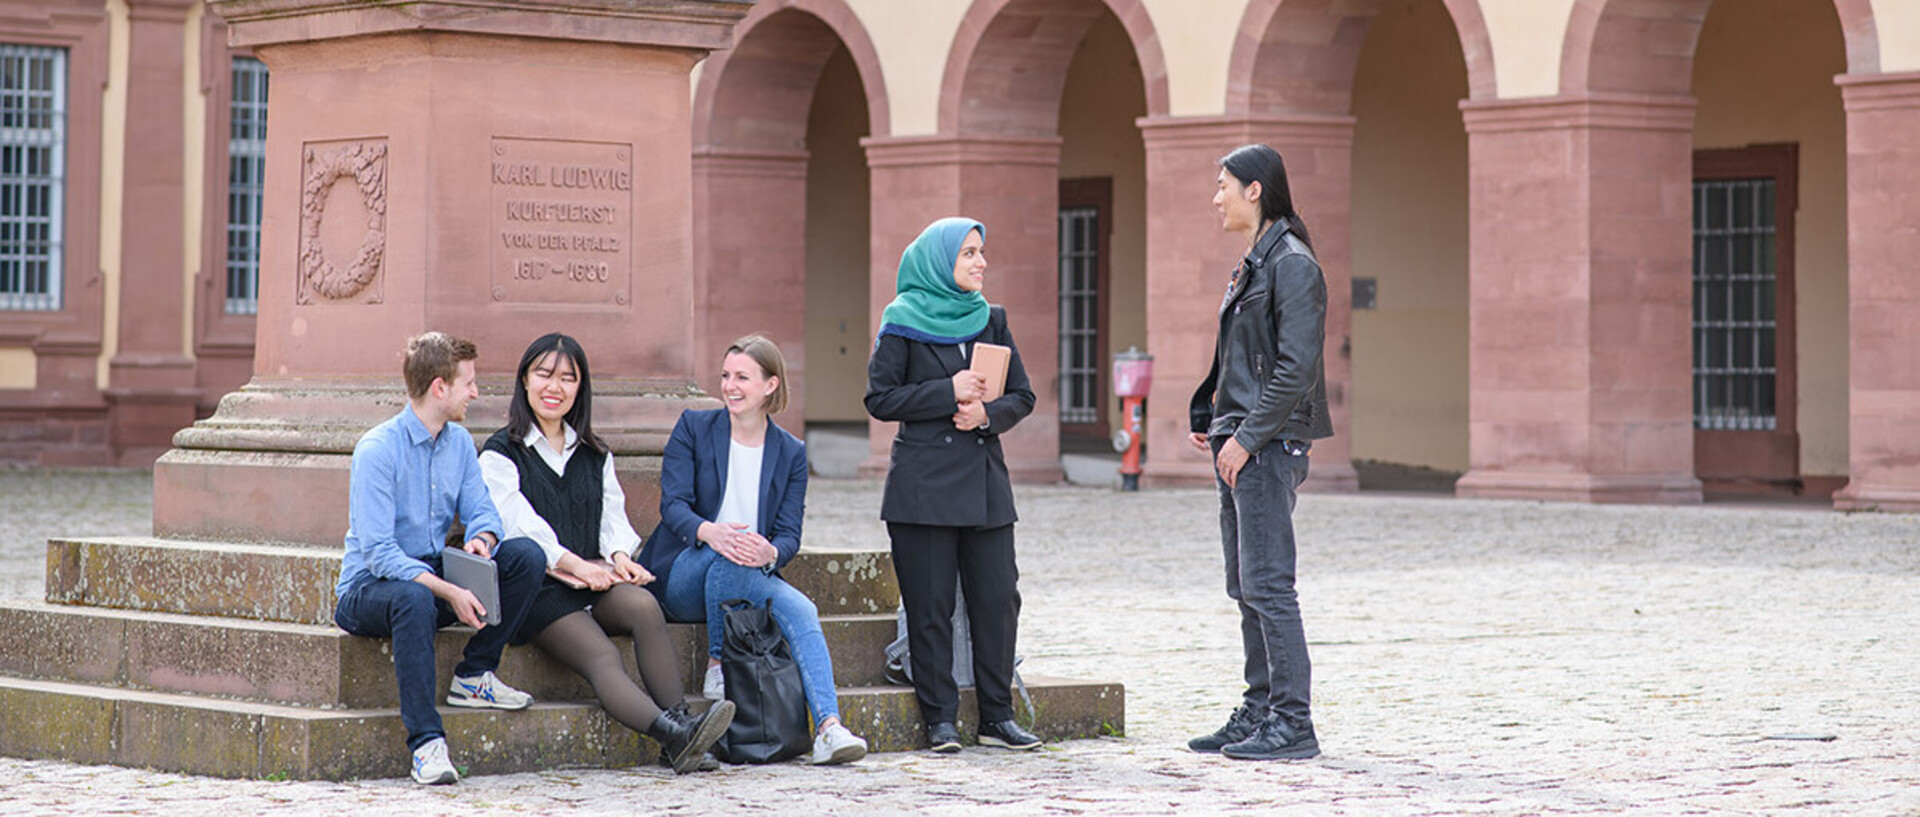 Five students conversing by the statue on the Ehrenhof